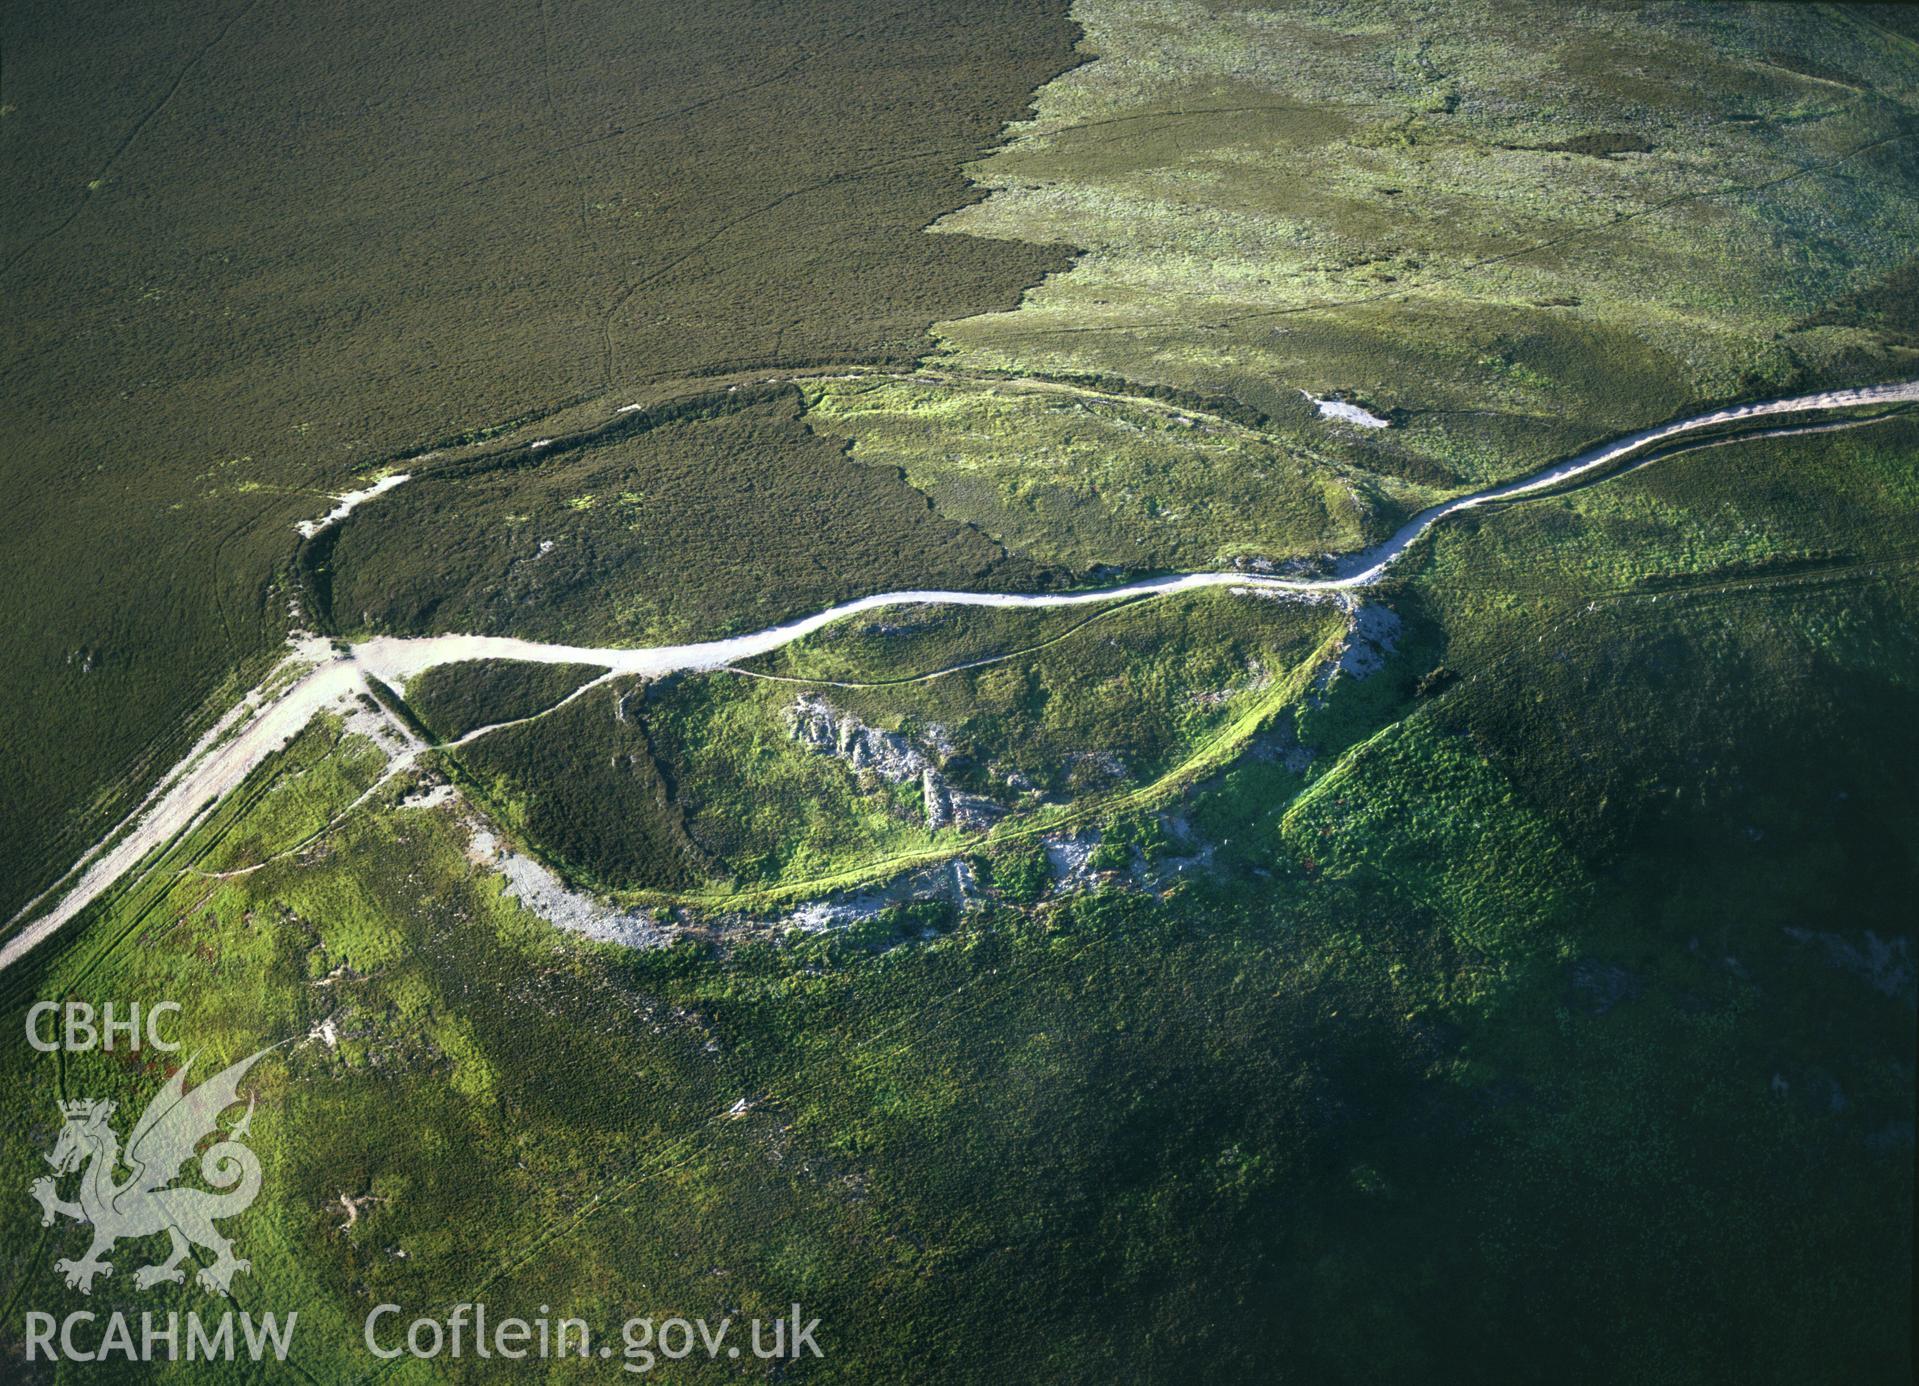 RCAHMW colour oblique aerial photograph of Moel y Gaer Hillfort. Taken by C R Musson 1993